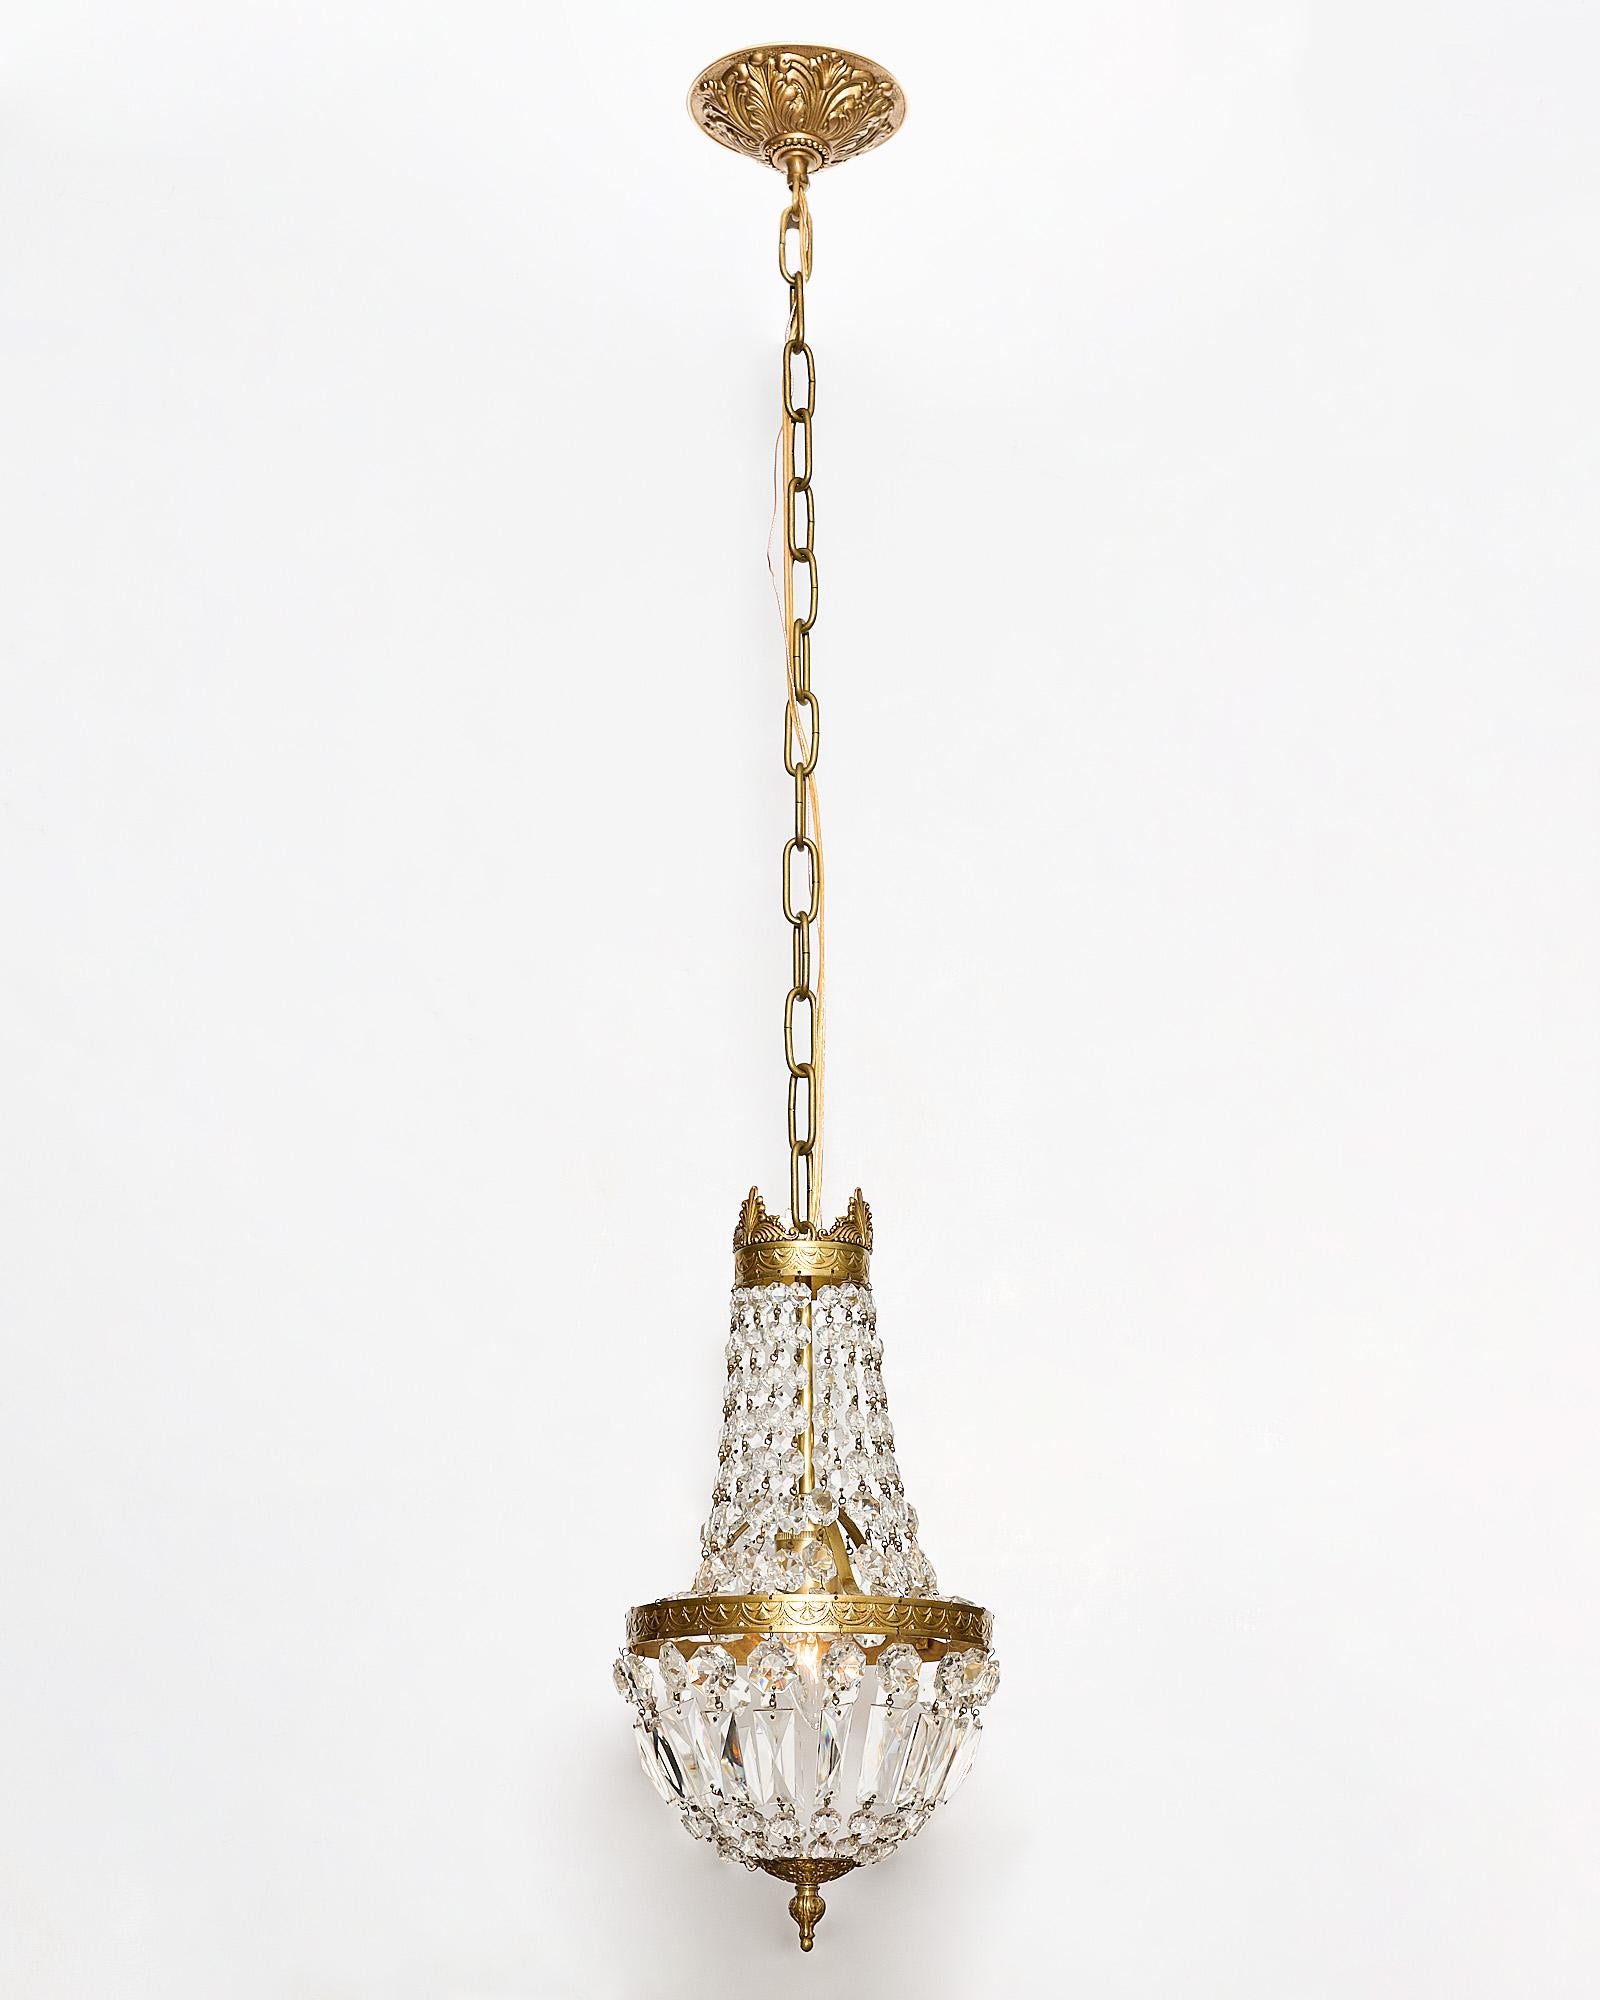 Chandelier, French, in the Louis XVI style. The neoclassic fixture is made of finely cast gilded bronze and features an array of cut crystal pendants and “cabochons”. It has been newly wired to fit US standards.